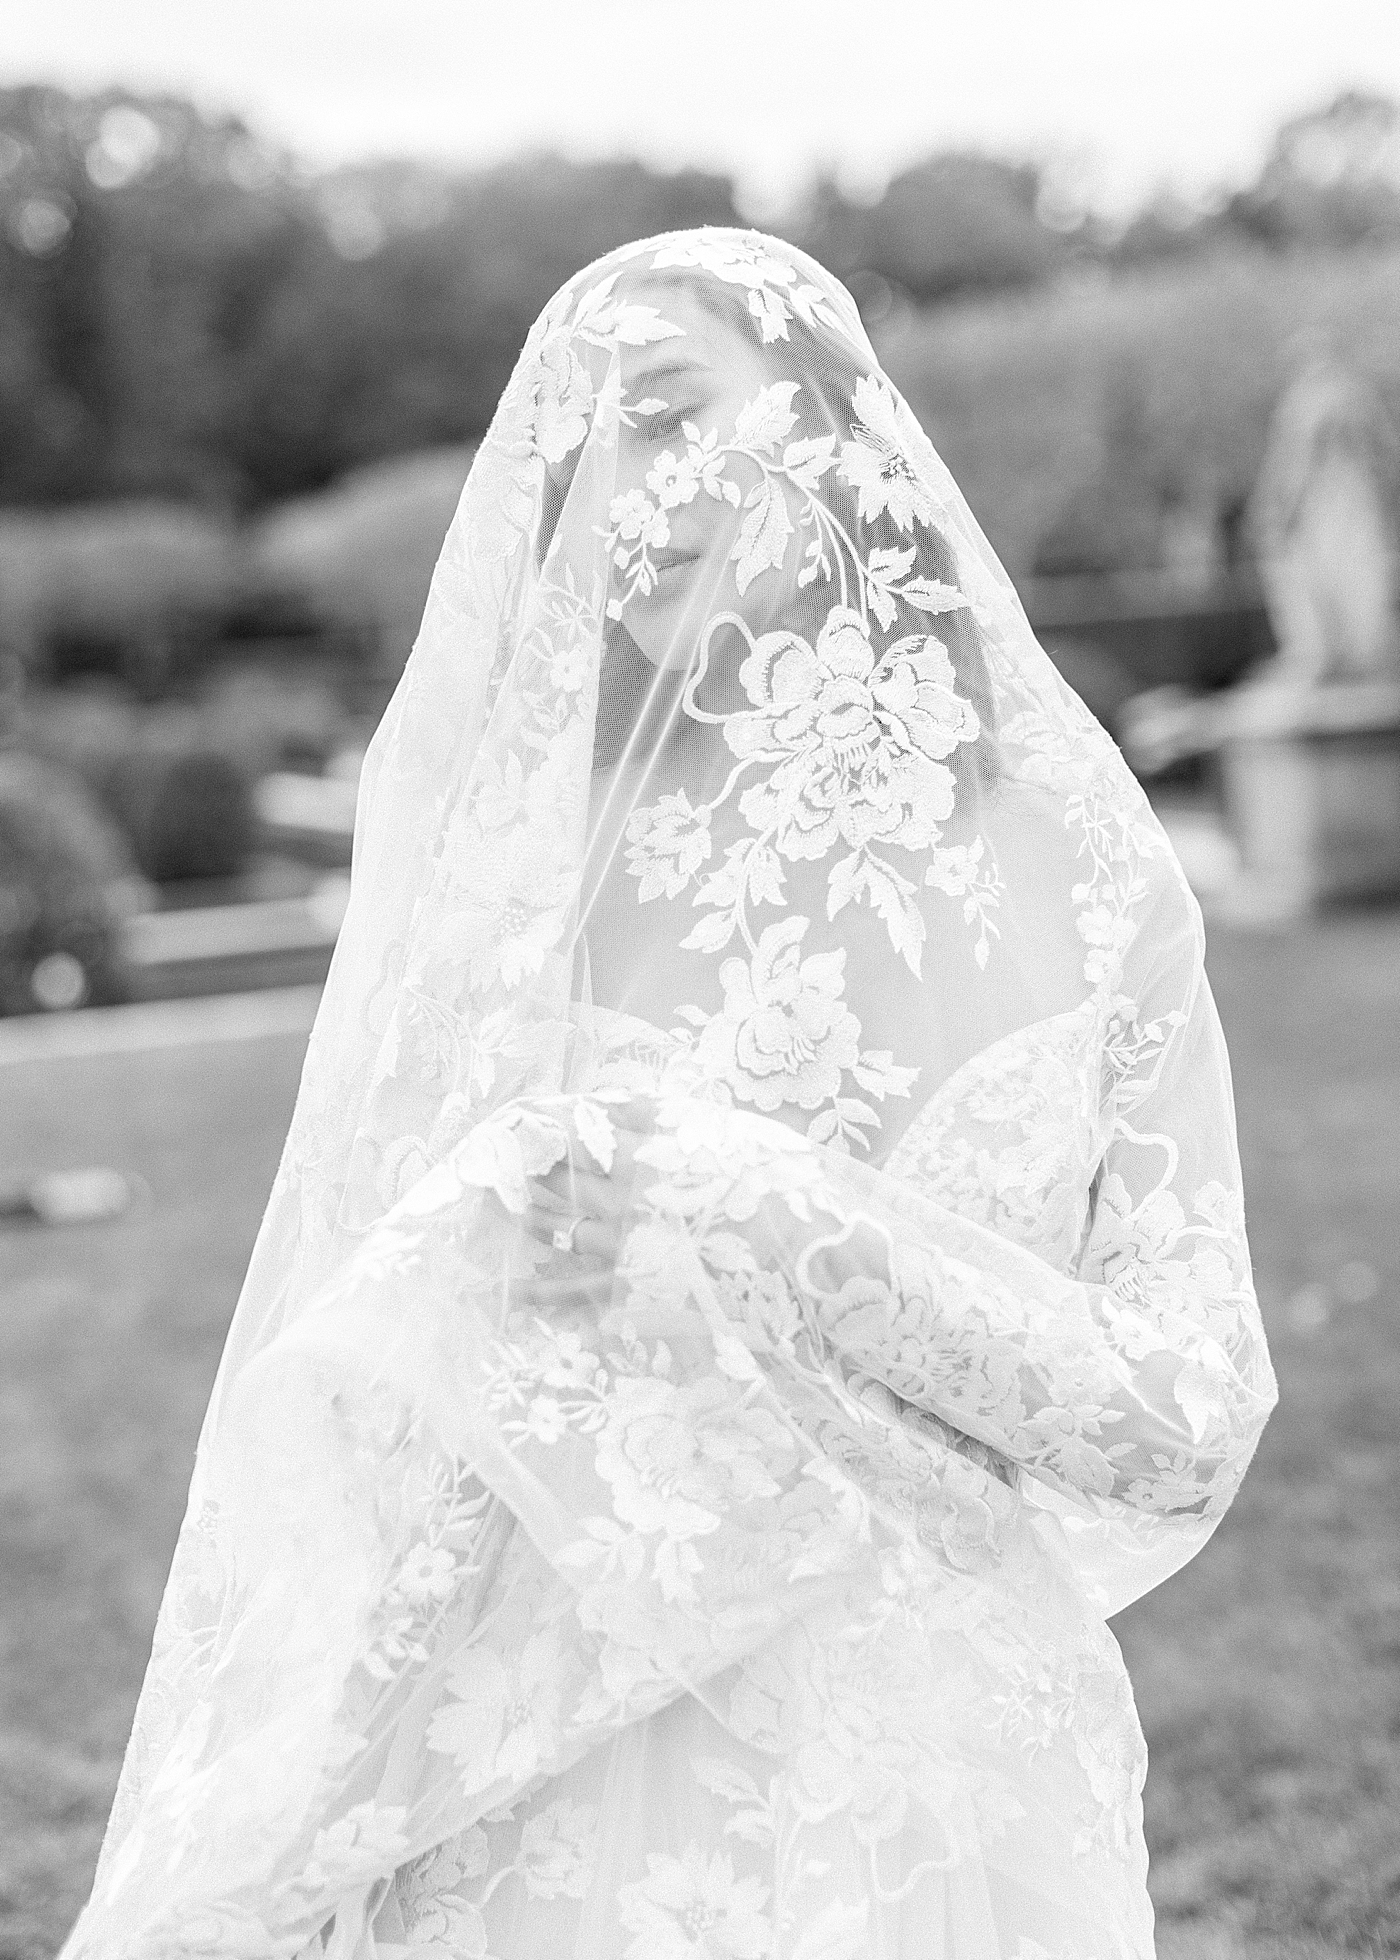 Black and white image of a bride with a veil covering her face | Image by Hope Helmuth Photography